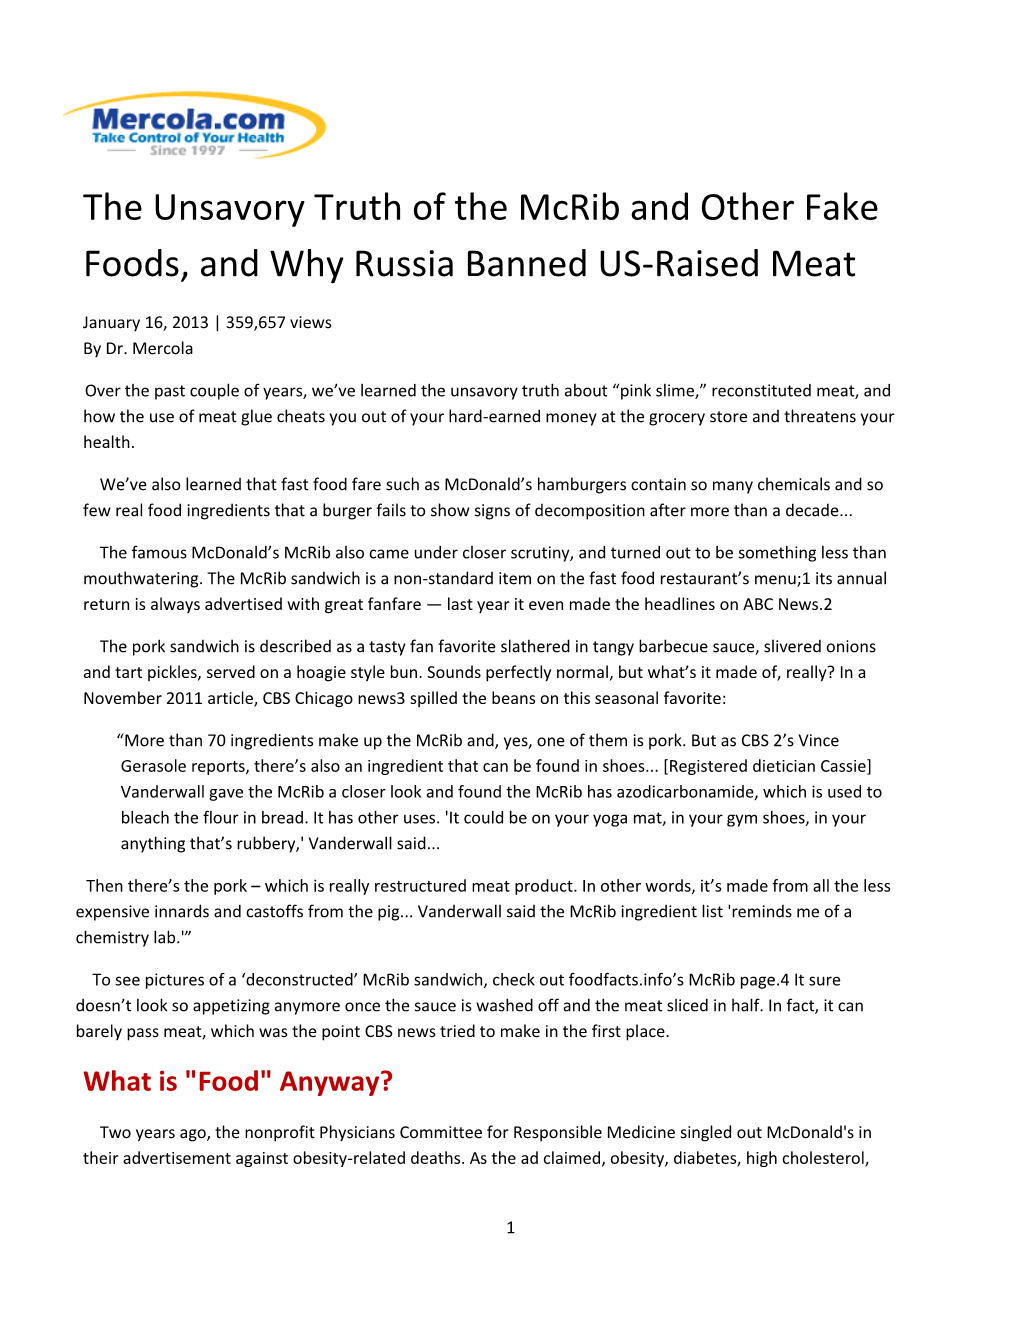 The Unsavory Truth of the Mcrib and Other Fake Foods, and Why Russia Banned US-Raised Meat